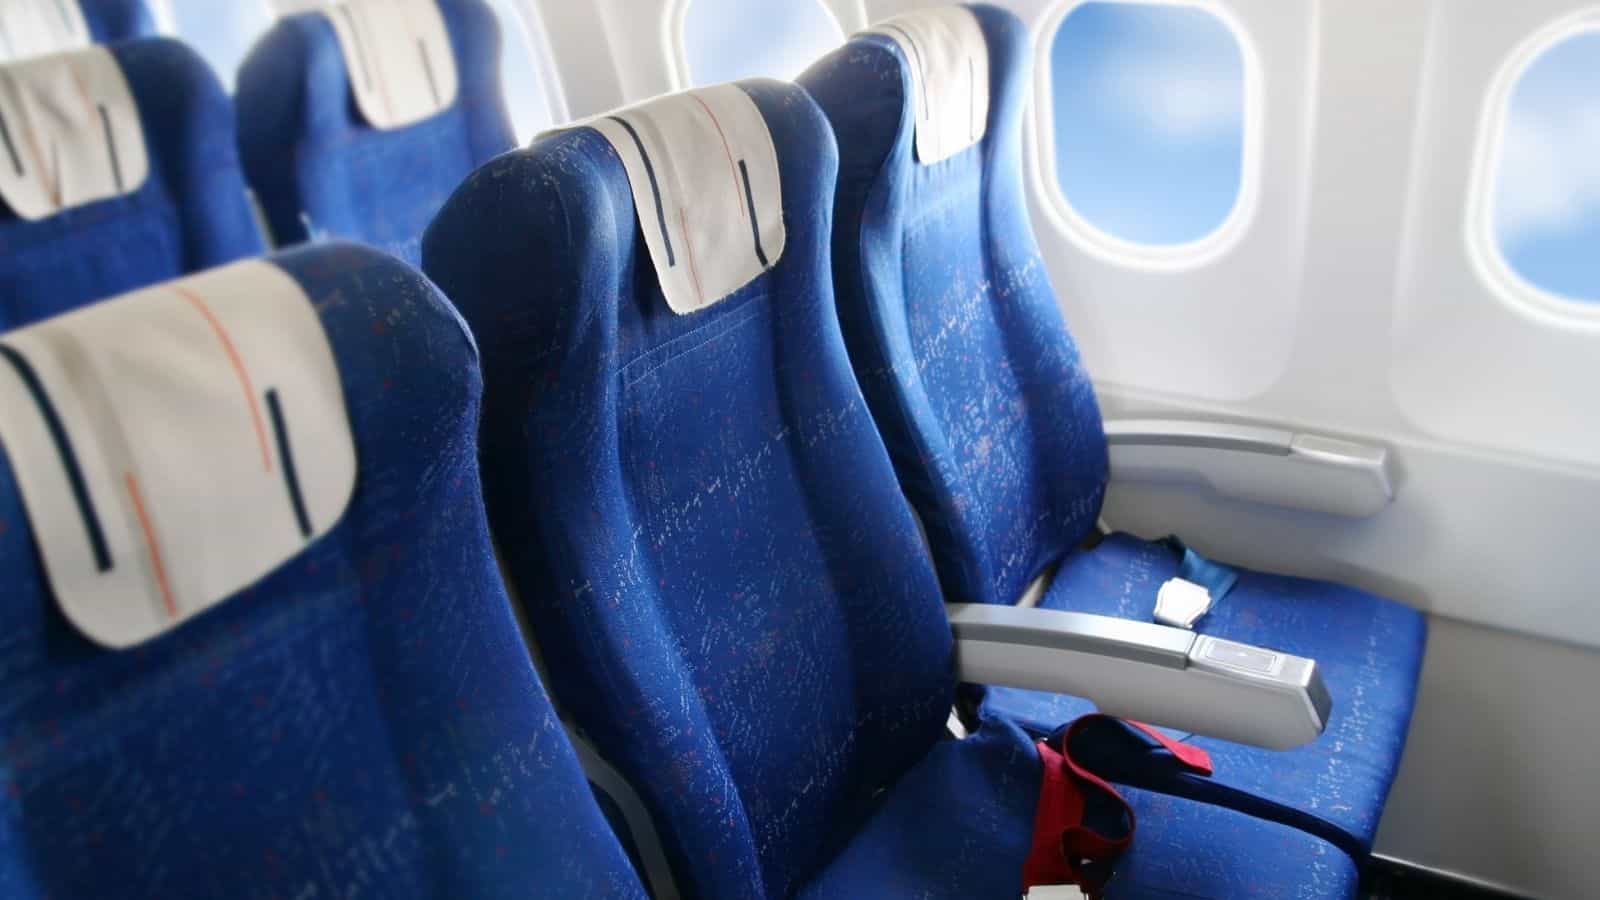 <p><a href="https://www.forbes.com/sites/garystoller/2024/01/28/armrest-who-gets-it-inflight/?sh=1bf096a7681b">Forbes</a> writes, “The middle-seat passenger should get both armrests in a three-seat configuration. Adjacent passengers in the window and aisle seats will still each have one armrest.” Always bear in mind that it’s important to share armrests with your fellow passengers, as it makes the flight more comfortable for everyone.</p>